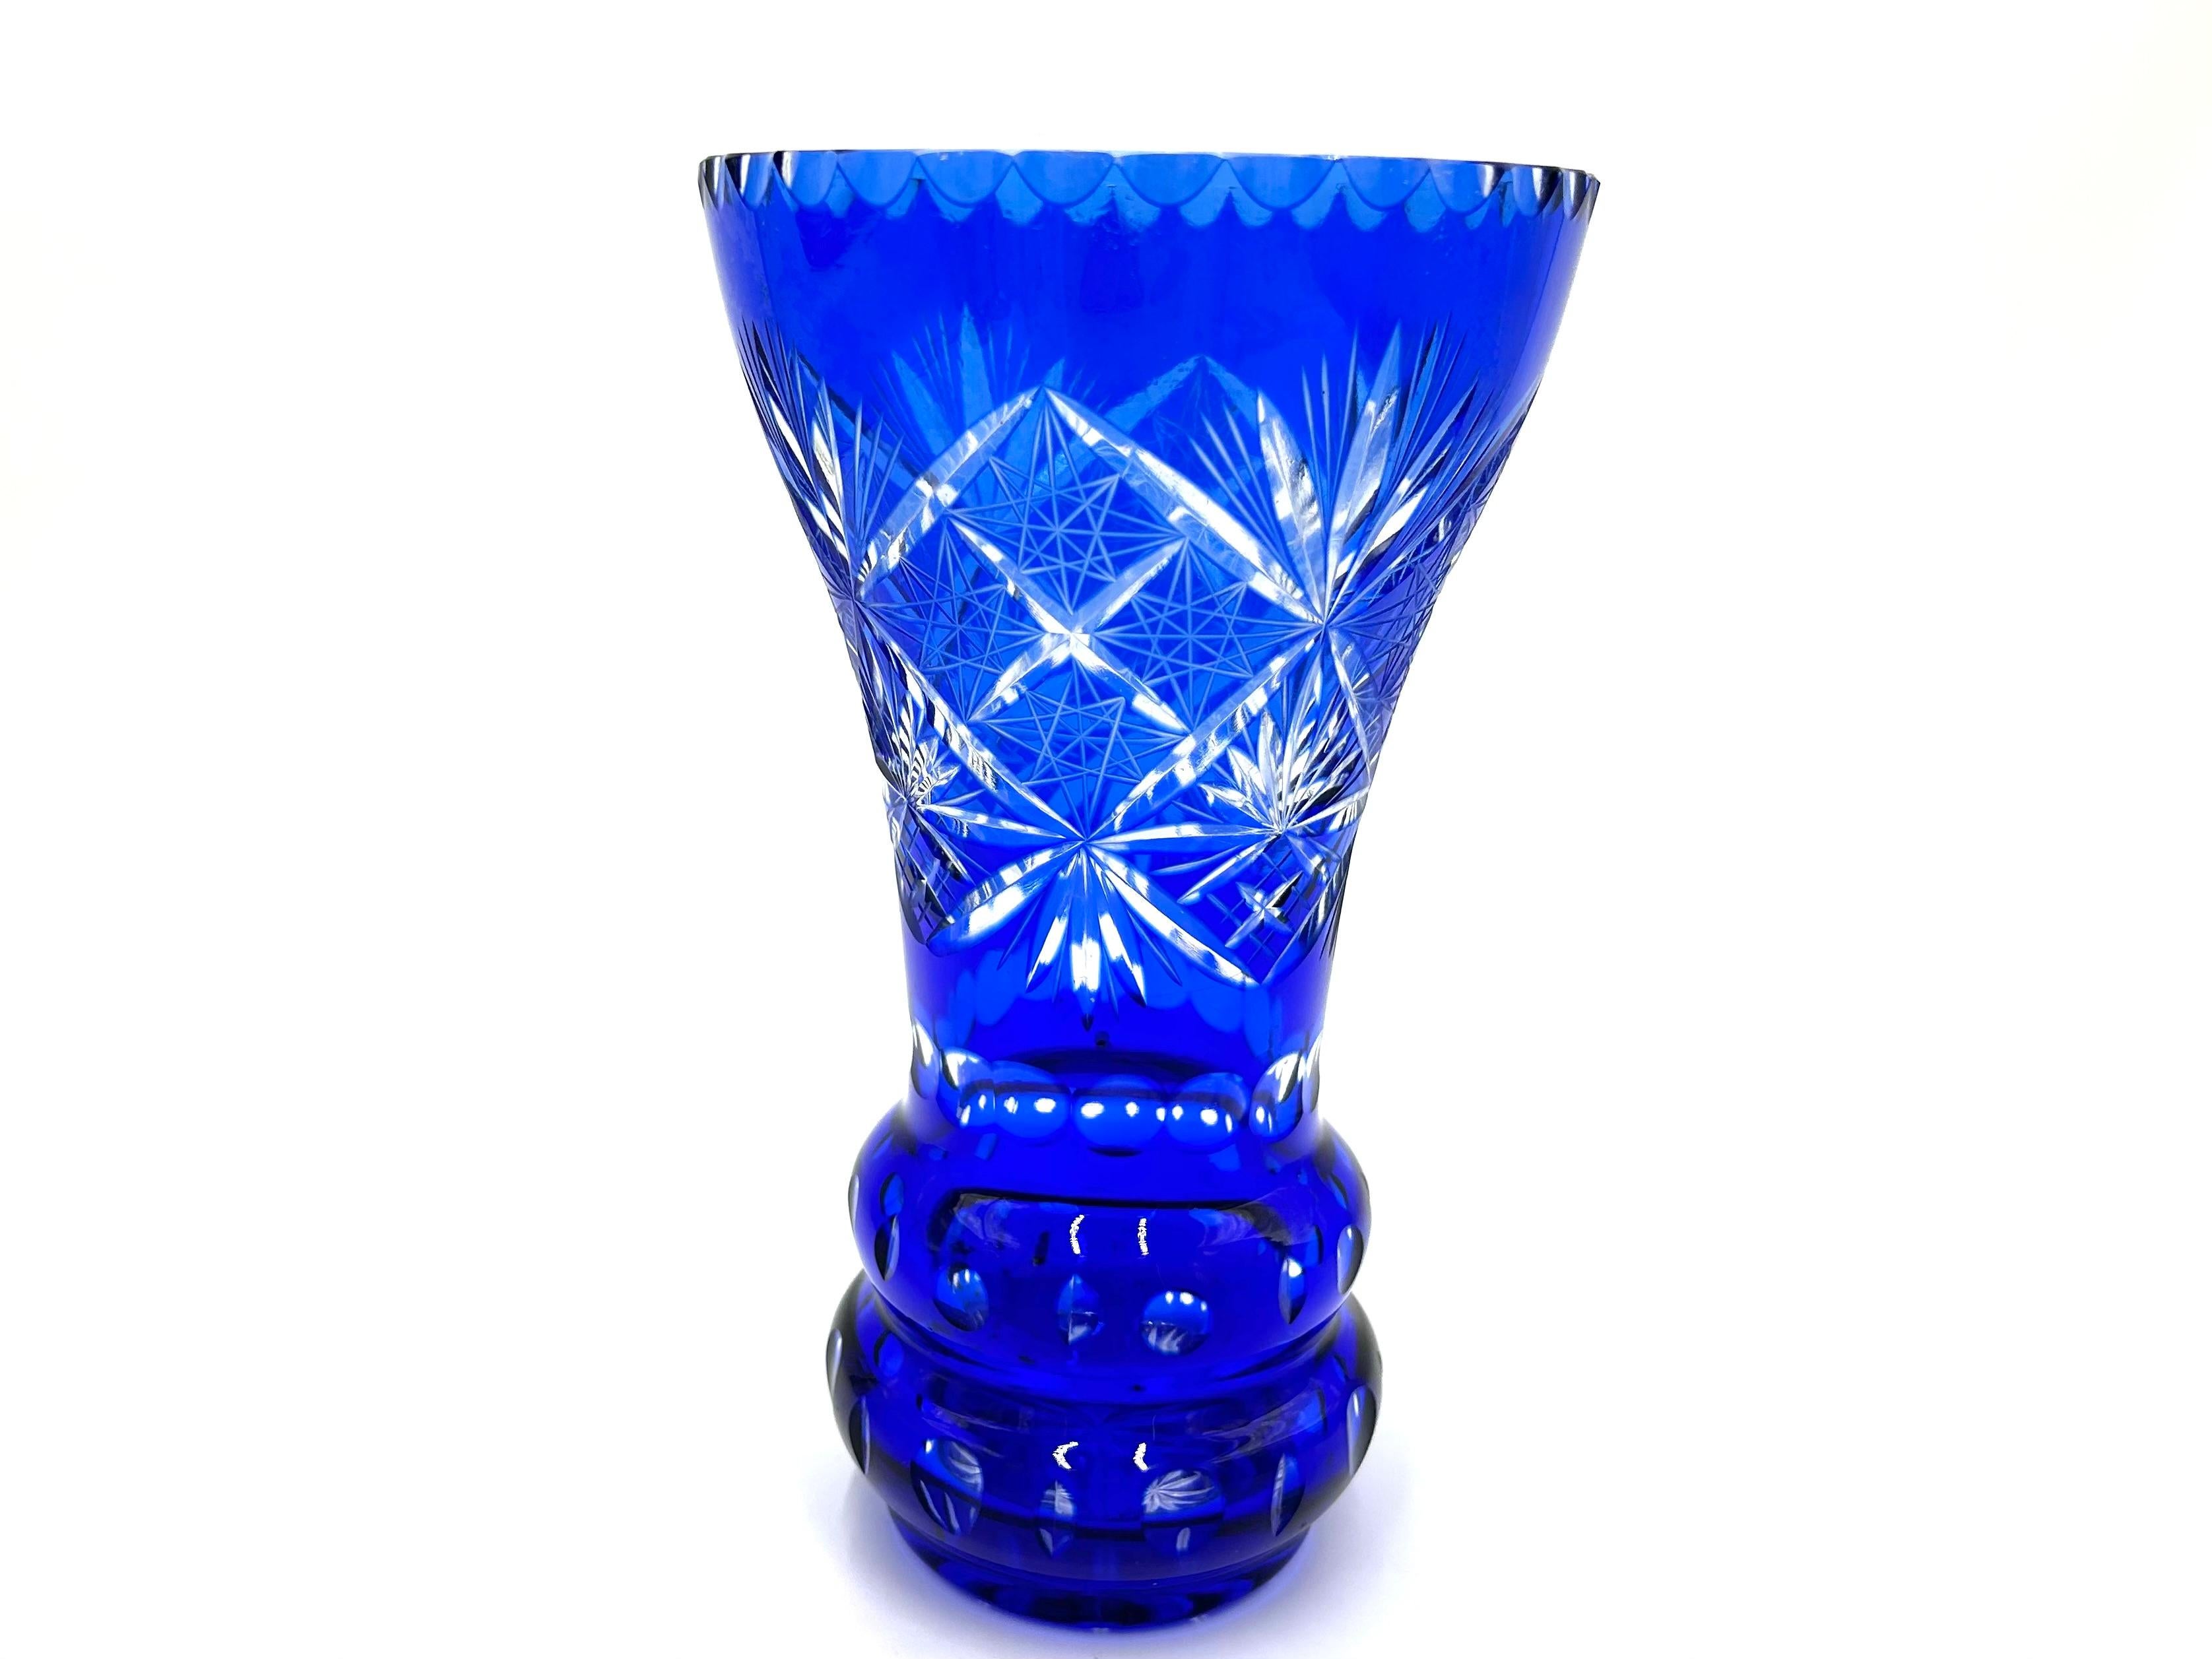 Cobalt blue crystal vase decorated with beautiful geometric cuts.

Made in Poland in the 1960s.

Very good condition, no damage.

height 25 cm, diameter 15 cm